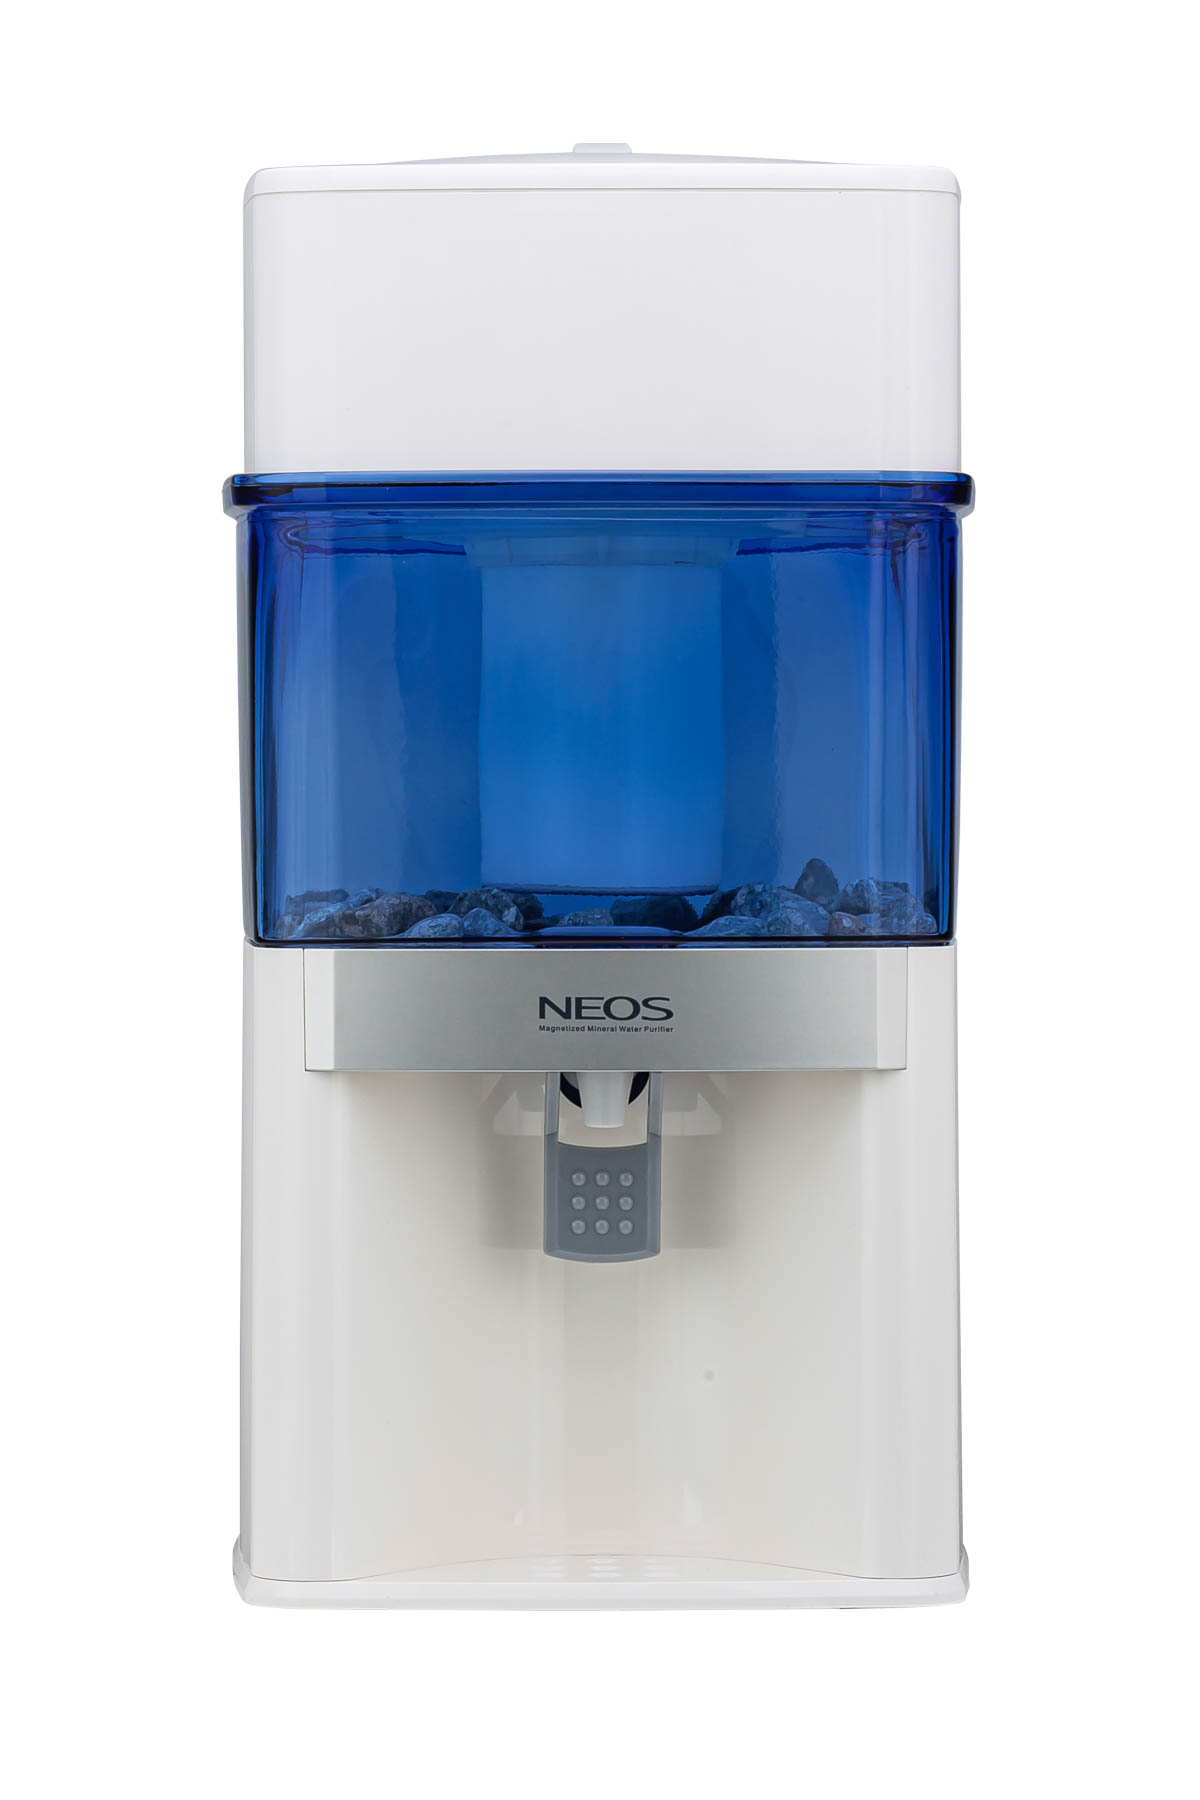 Image Aqualine Neos water filter with glass tank and Redox filter